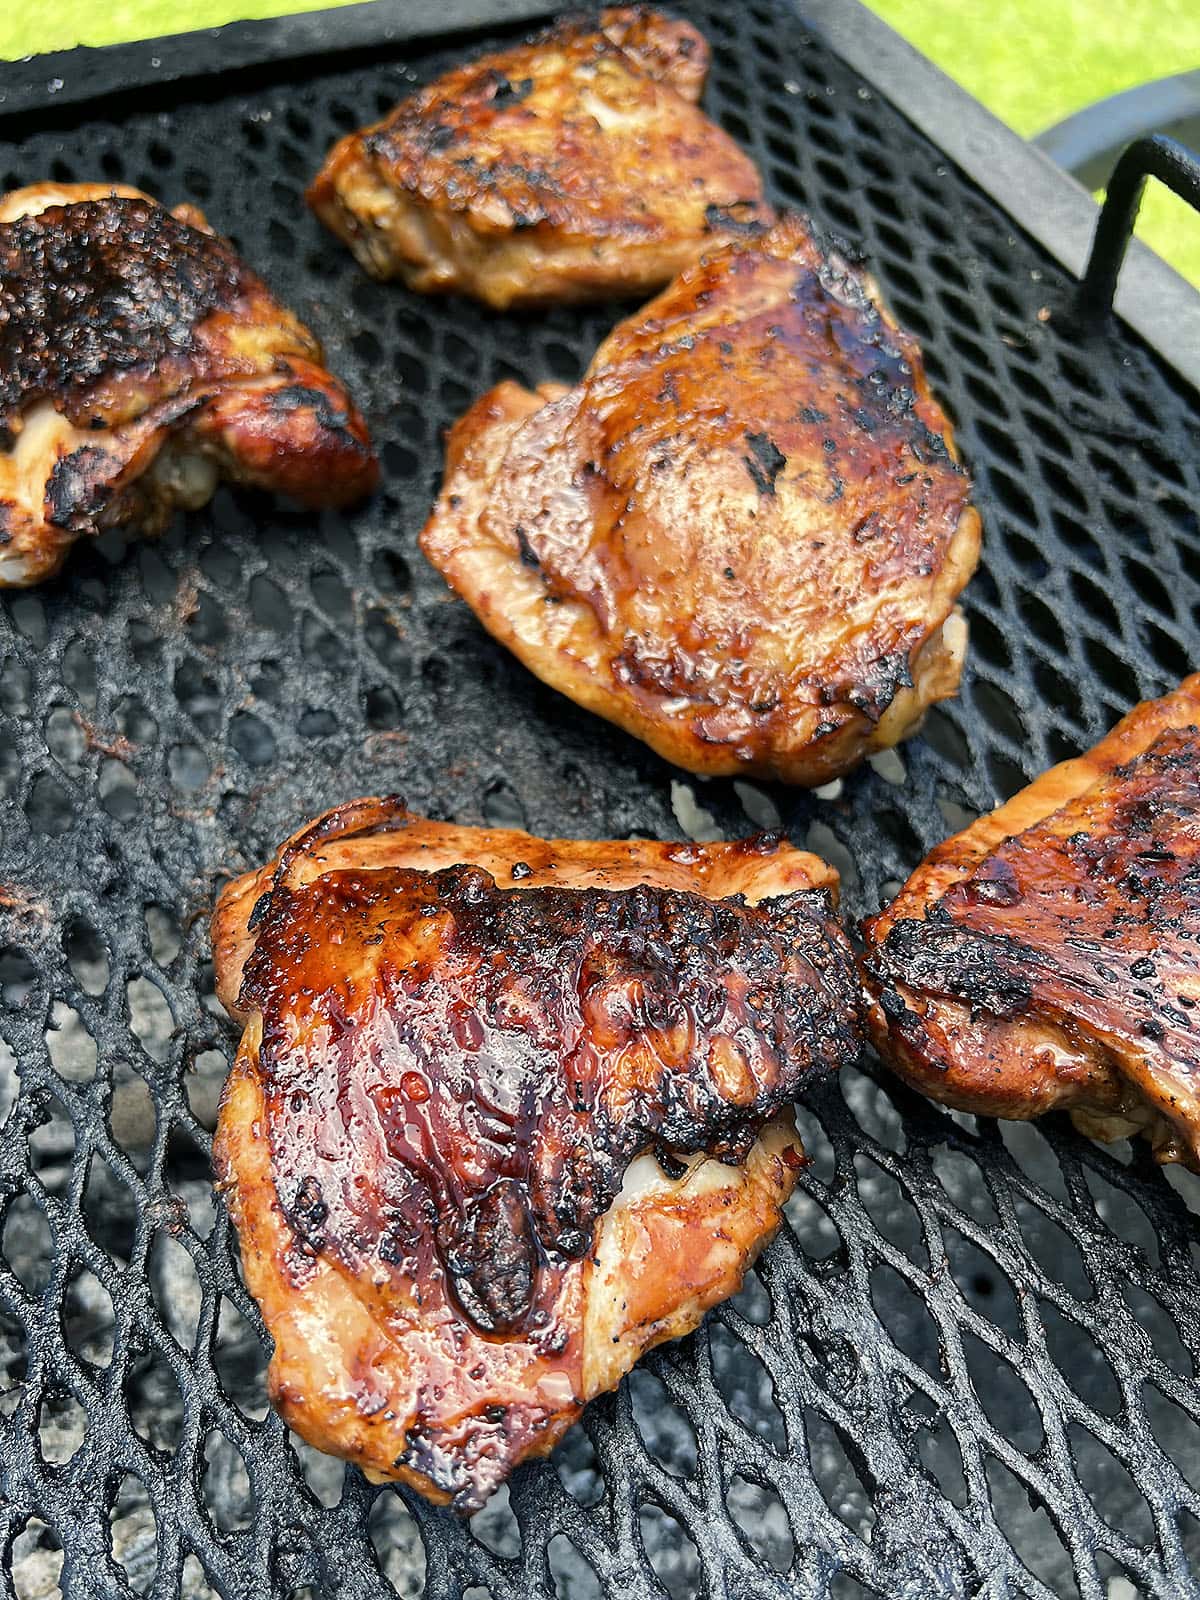 grilled pineapple chicken thighs skin side up cooking over the hot side of the grill